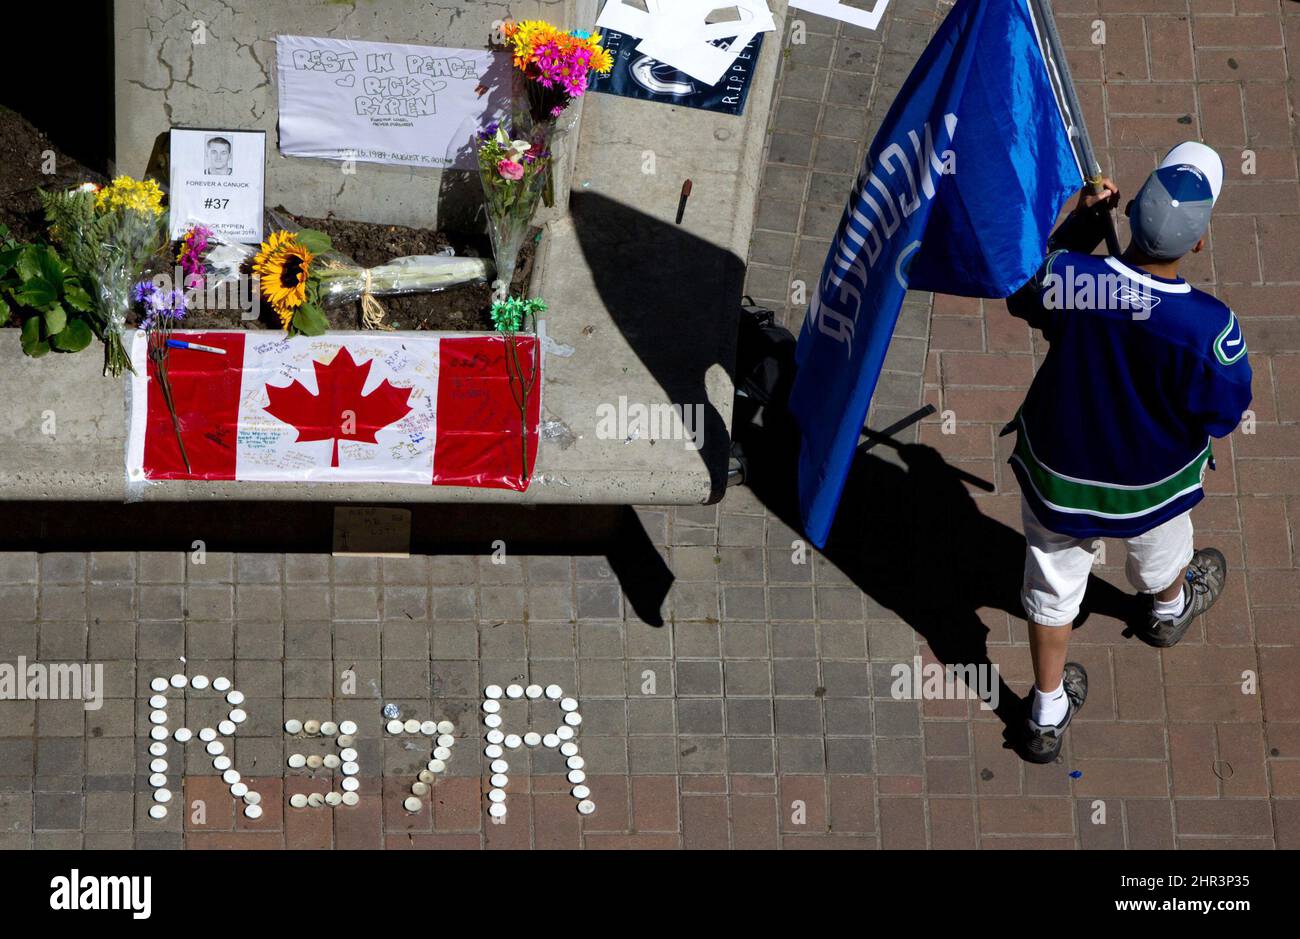 Calvin Ng carries a Vancouver Canucks flag at a makeshift memorial for former Canucks hockey player Rick Rypien outside Rogers Arena in Vancouver, B.C., on Tuesday Aug. 16, 2011. Rypien, who signed a one-year deal with the Winnipeg Jets in July, was found dead at his Alberta home on Monday. (AP Photo/The Canadian Press, Darryl Dyck) Stock Photo